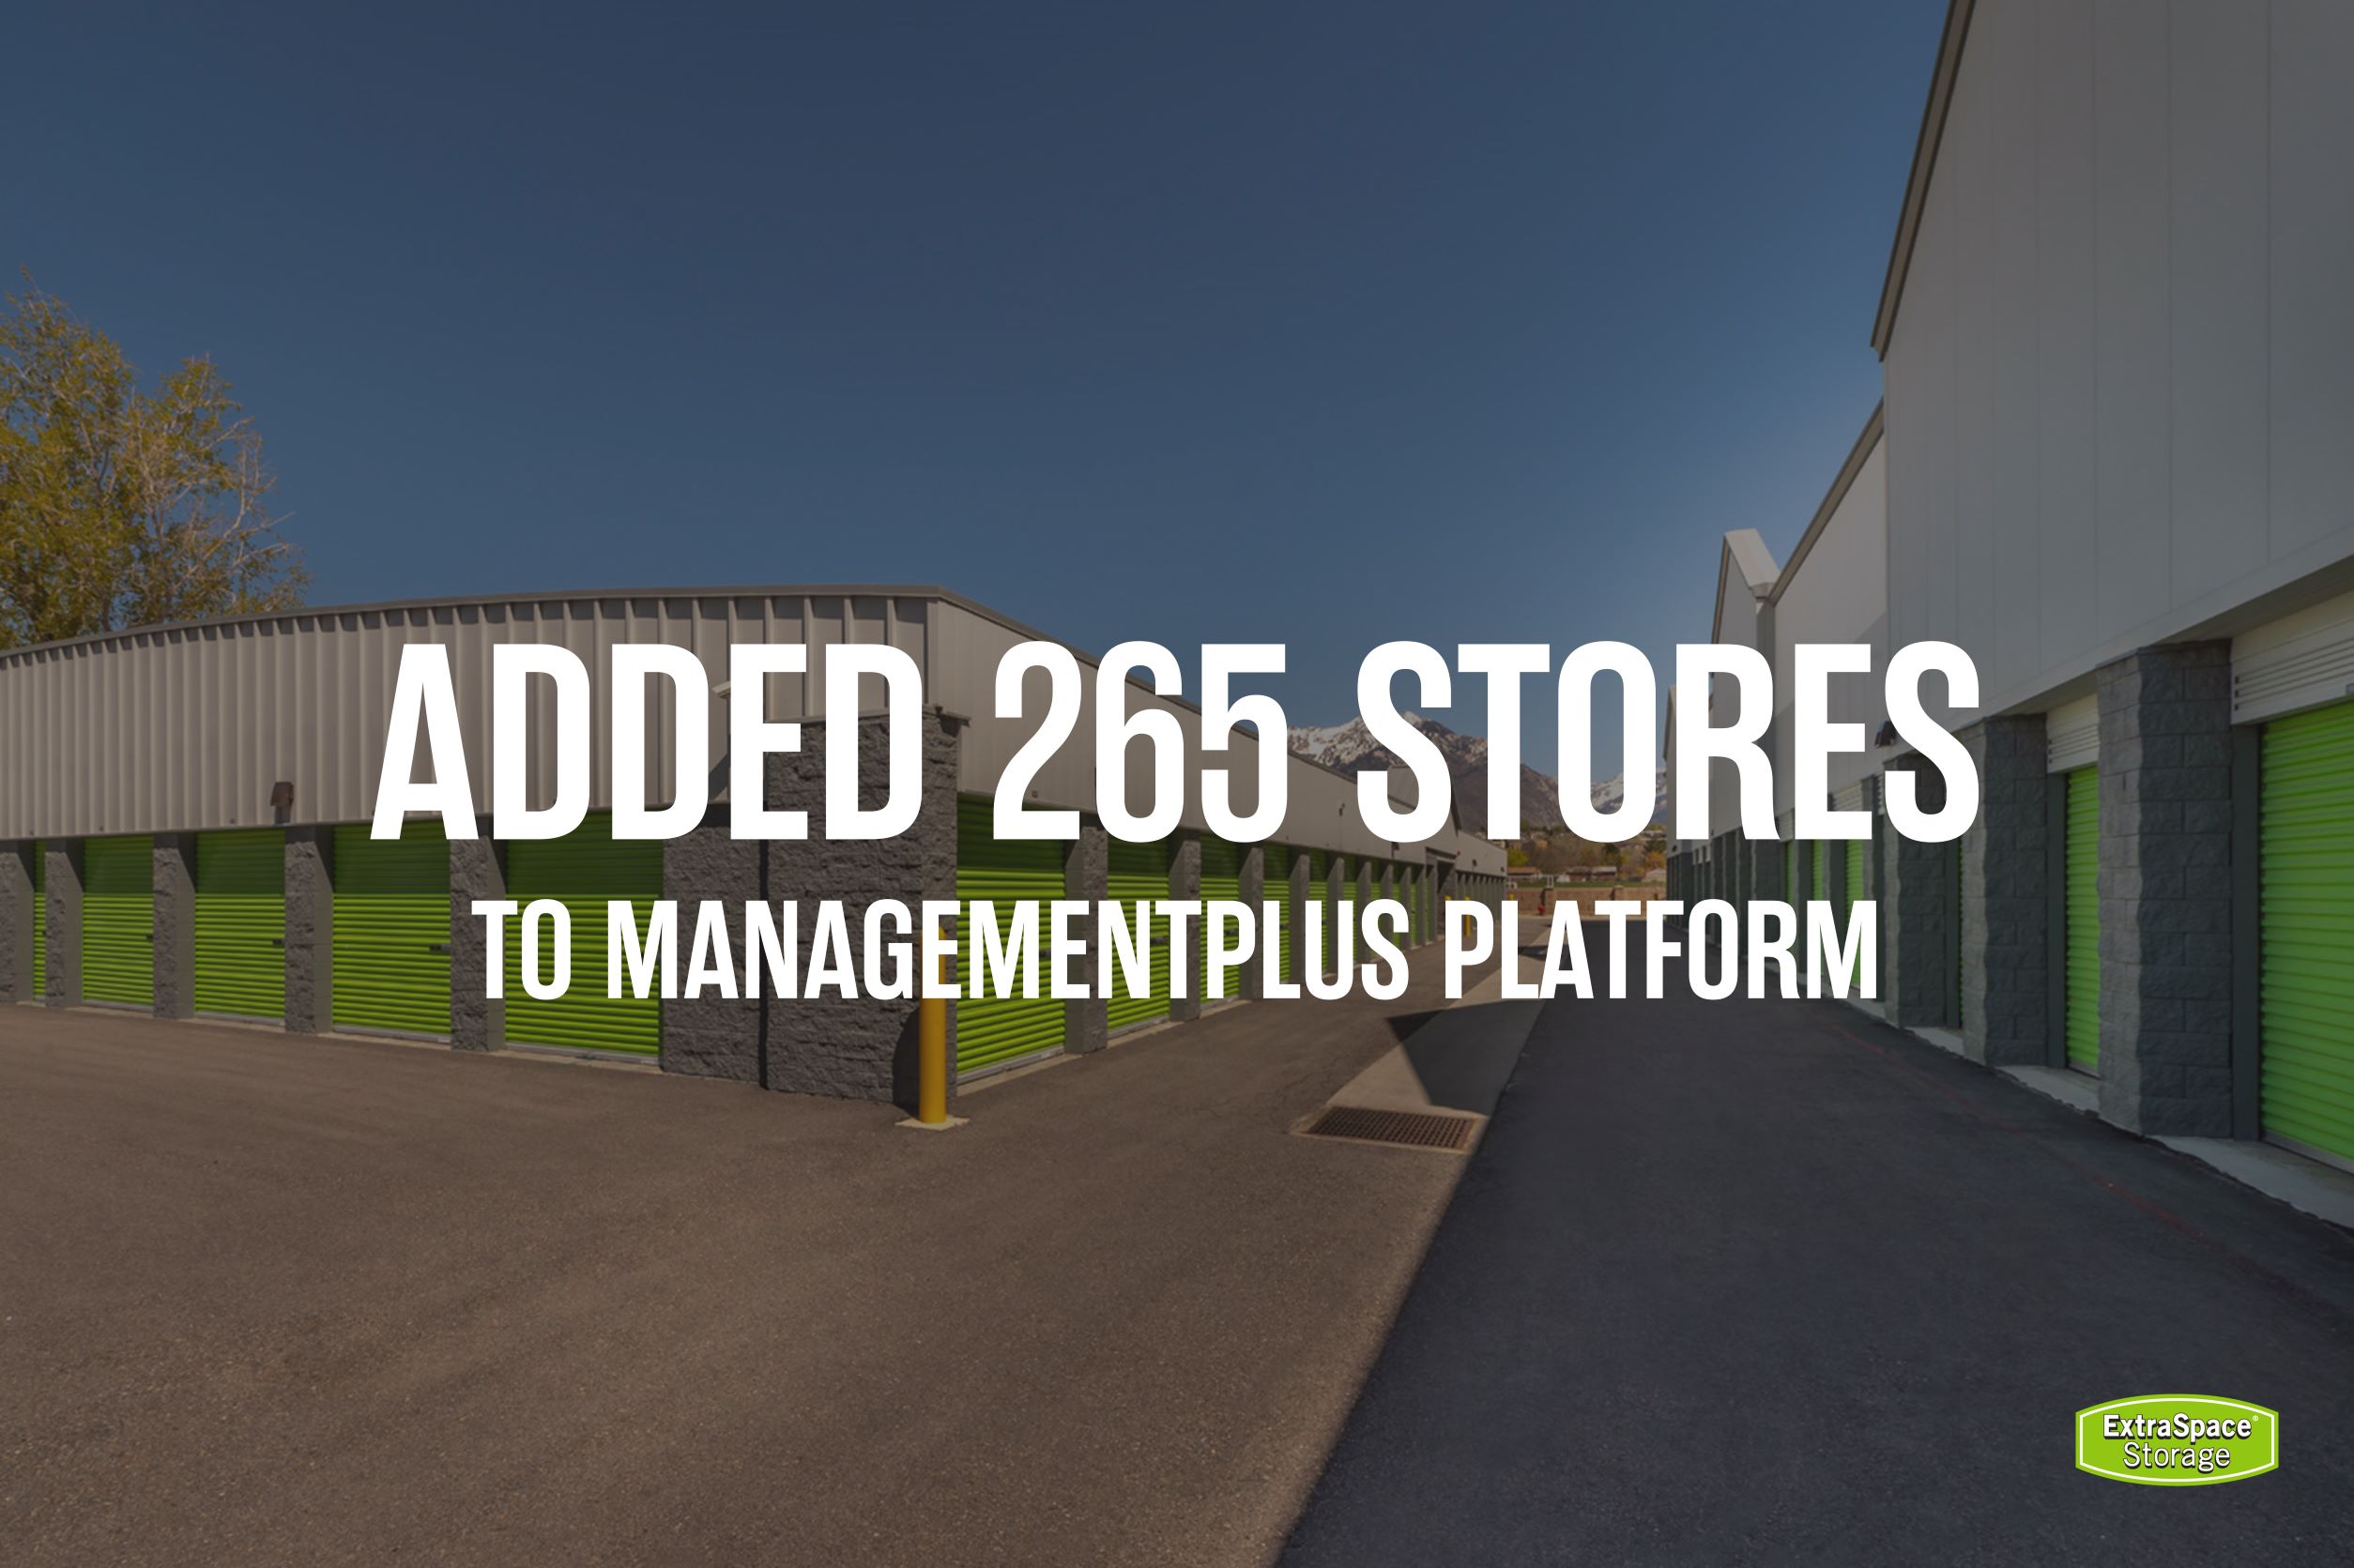 Graphic with text "Added 265 stores to ManagementPlus Platform"